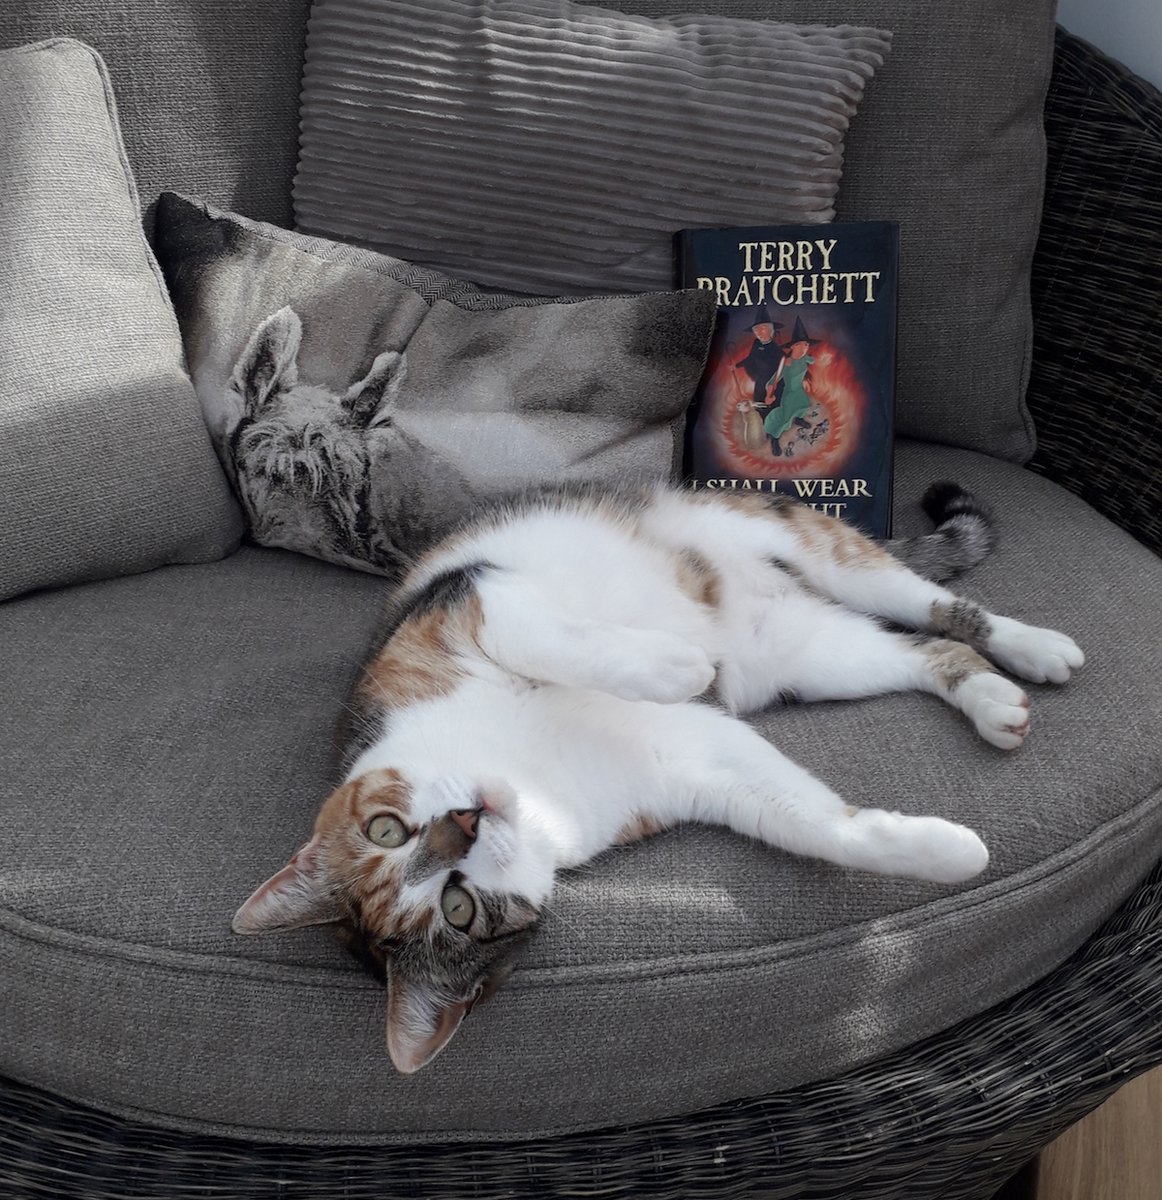 Claire from  #Girvan Library and her lovely fur babies  are reading 'I Shall Wear Midnight' together by Terry Pratchet. Claire says it's the perfect book to escape with just now.  #ReadingHour  #WorldBookNight